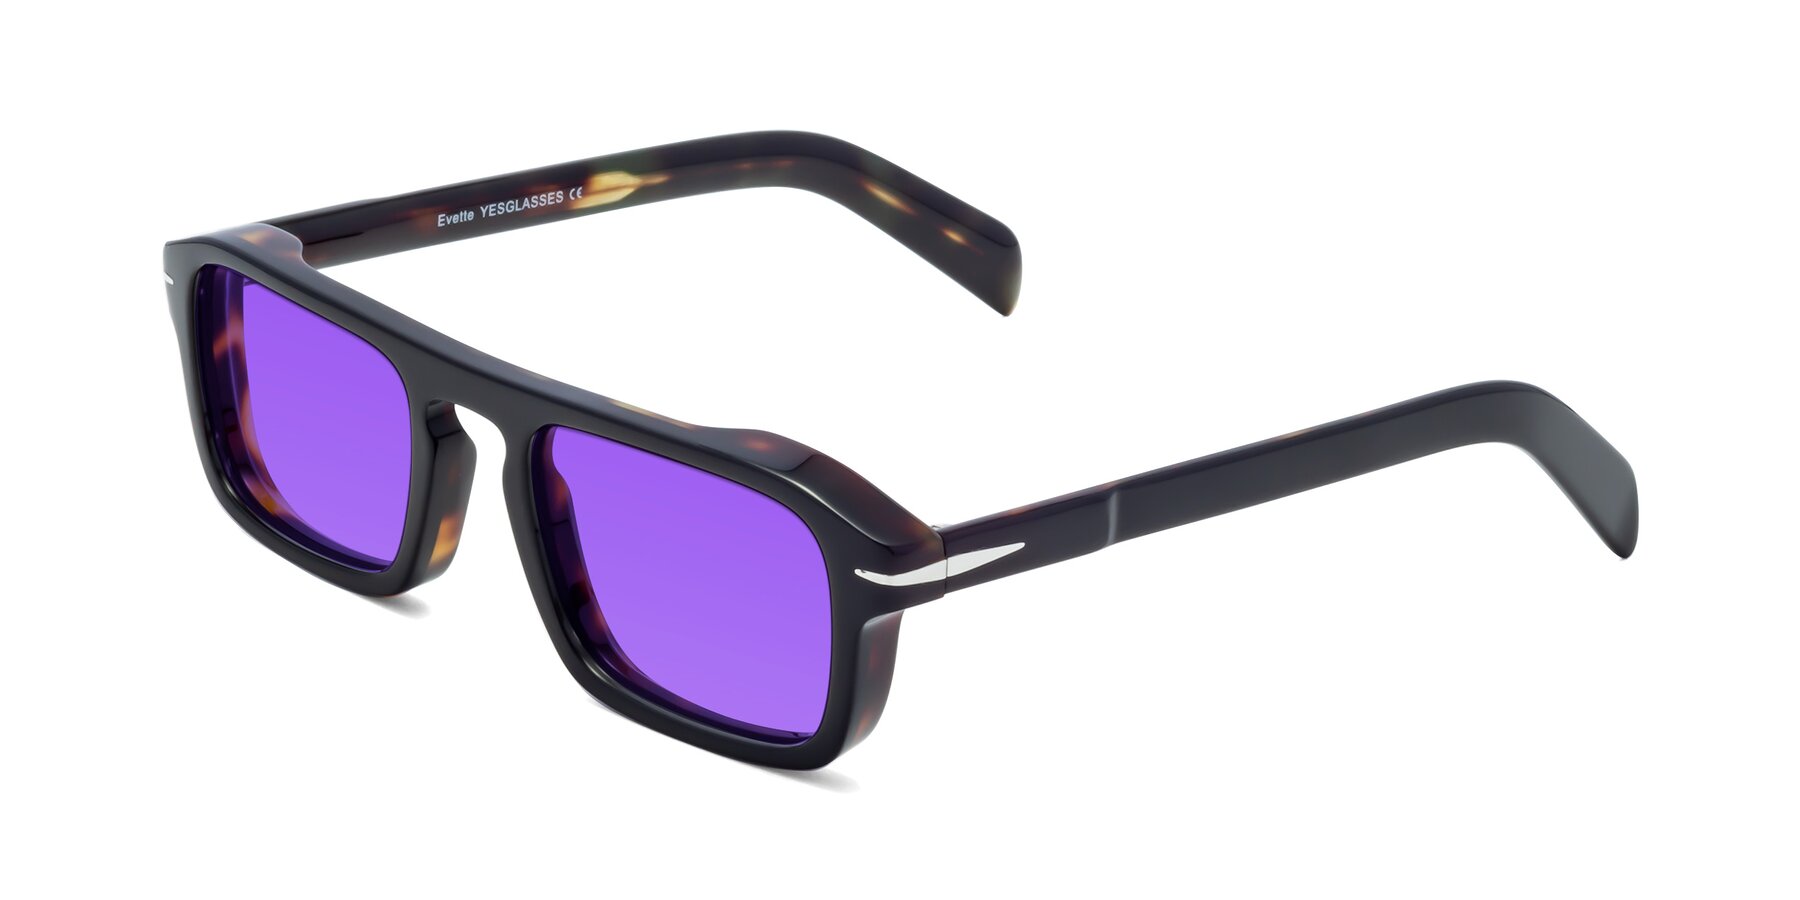 Angle of Evette in Black-Tortoise with Purple Tinted Lenses